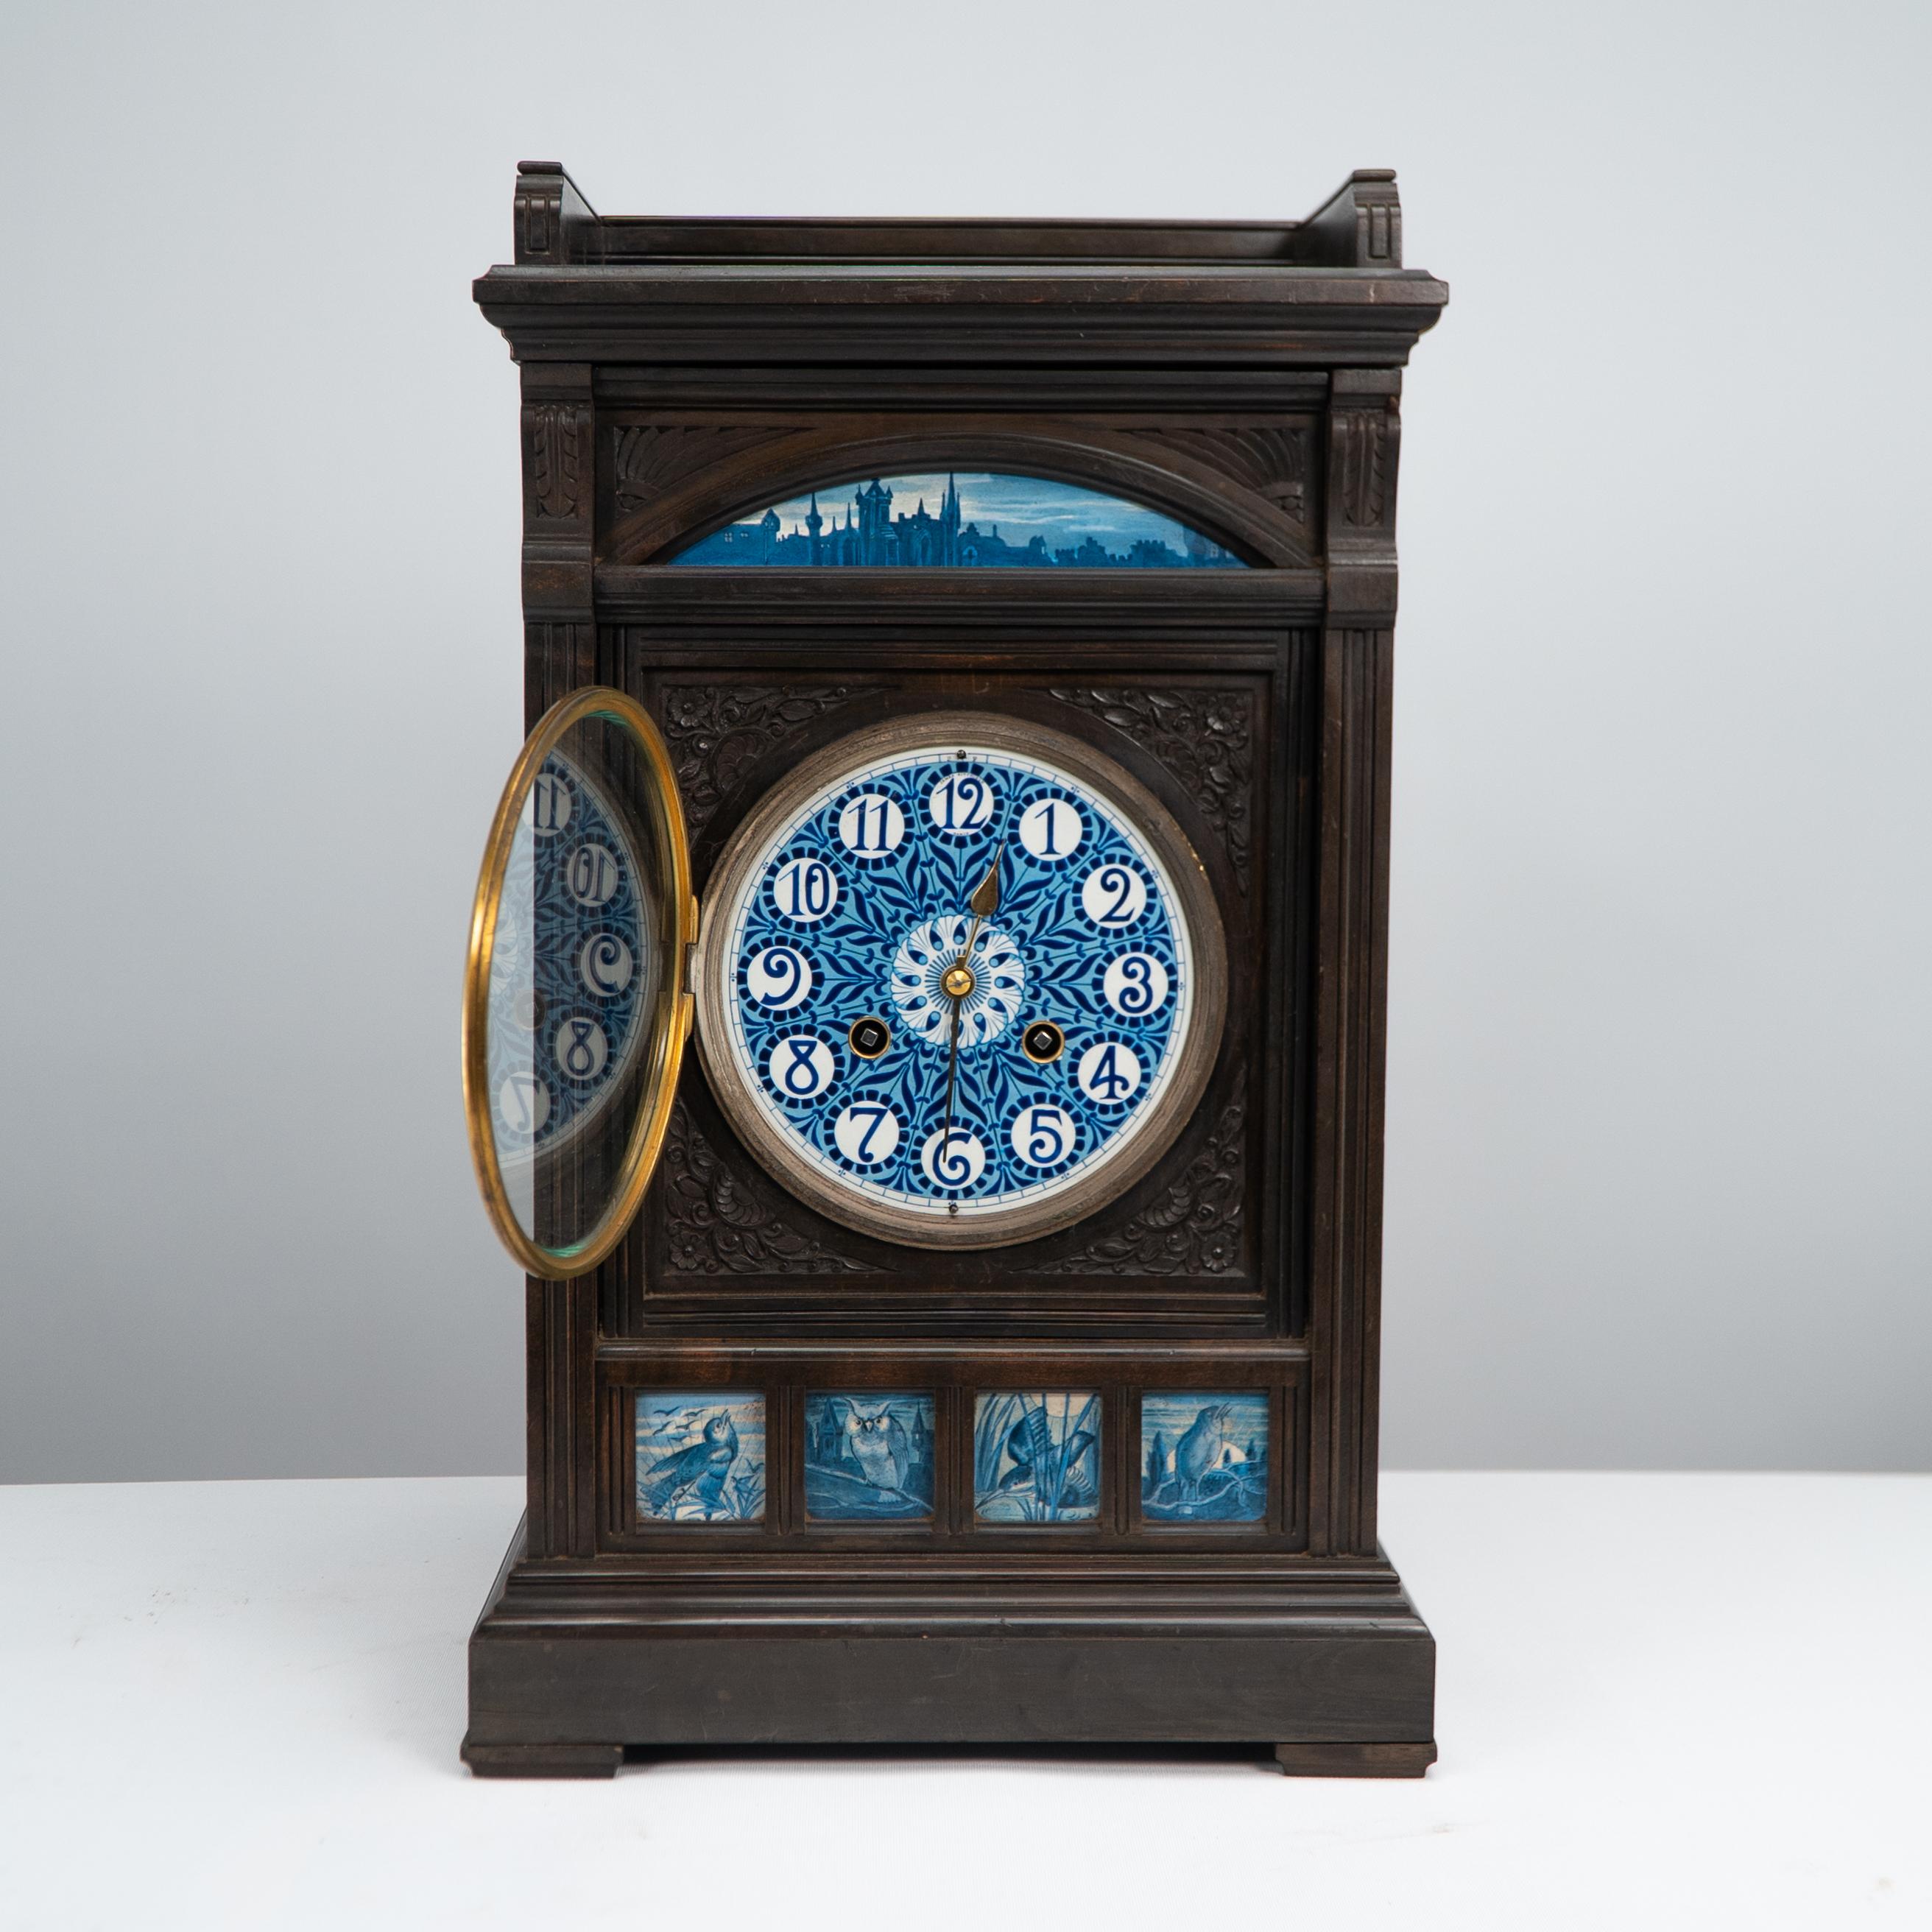 An Aesthetic Movement mantel or bracket clock, Signed James Aitchison, Paris in the number 12, with finely carved floral decoration to the front and sides, a french city evening scene depicting knockturn with handpainted stylised floral sunflowers